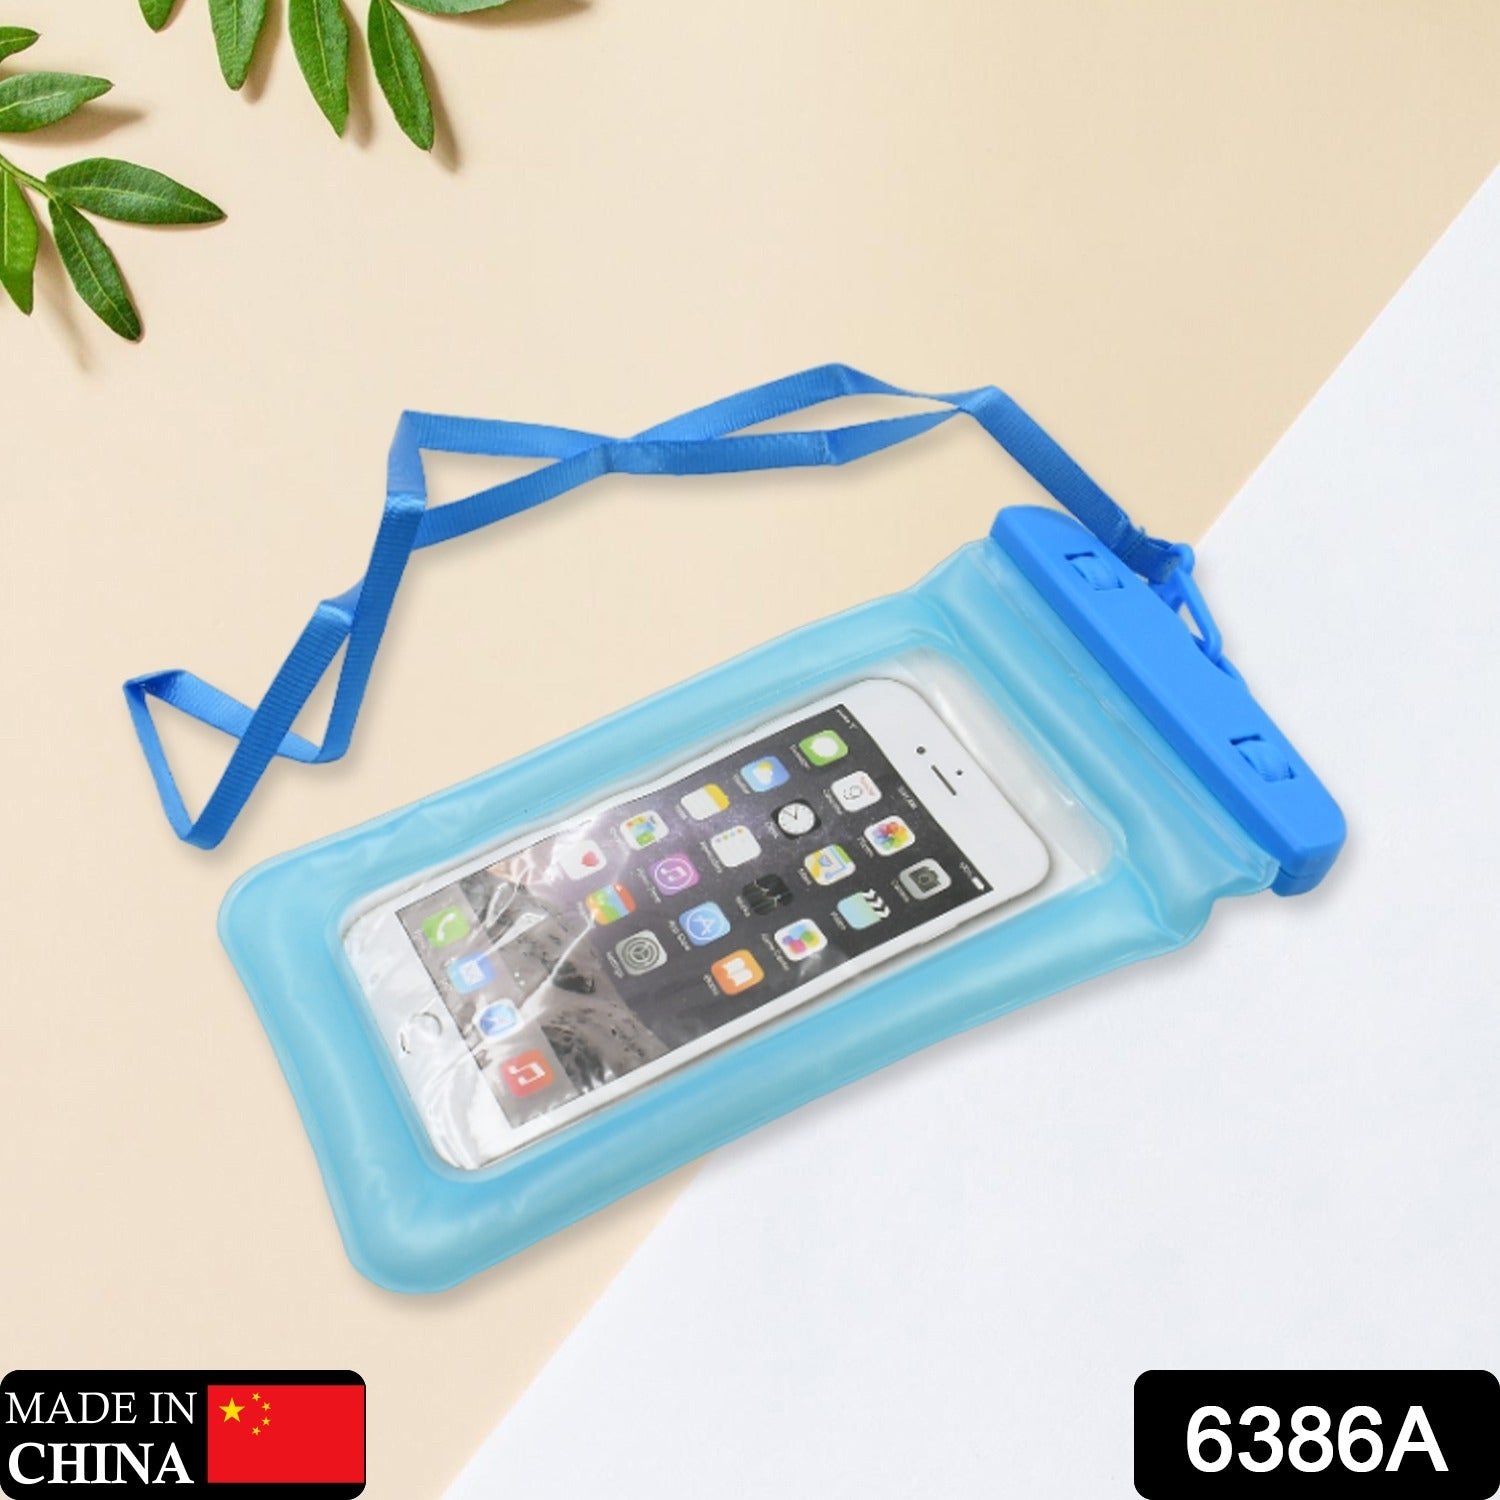 Mix Color Waterproof Pouch Lock Mobile Cover Under Water Mobile Case Waterproof Mobile Phone Case, Waist Bag, Underwater Bag for Smartphone iPhone, Swimming, Rain Cover Camping For all Mobile.